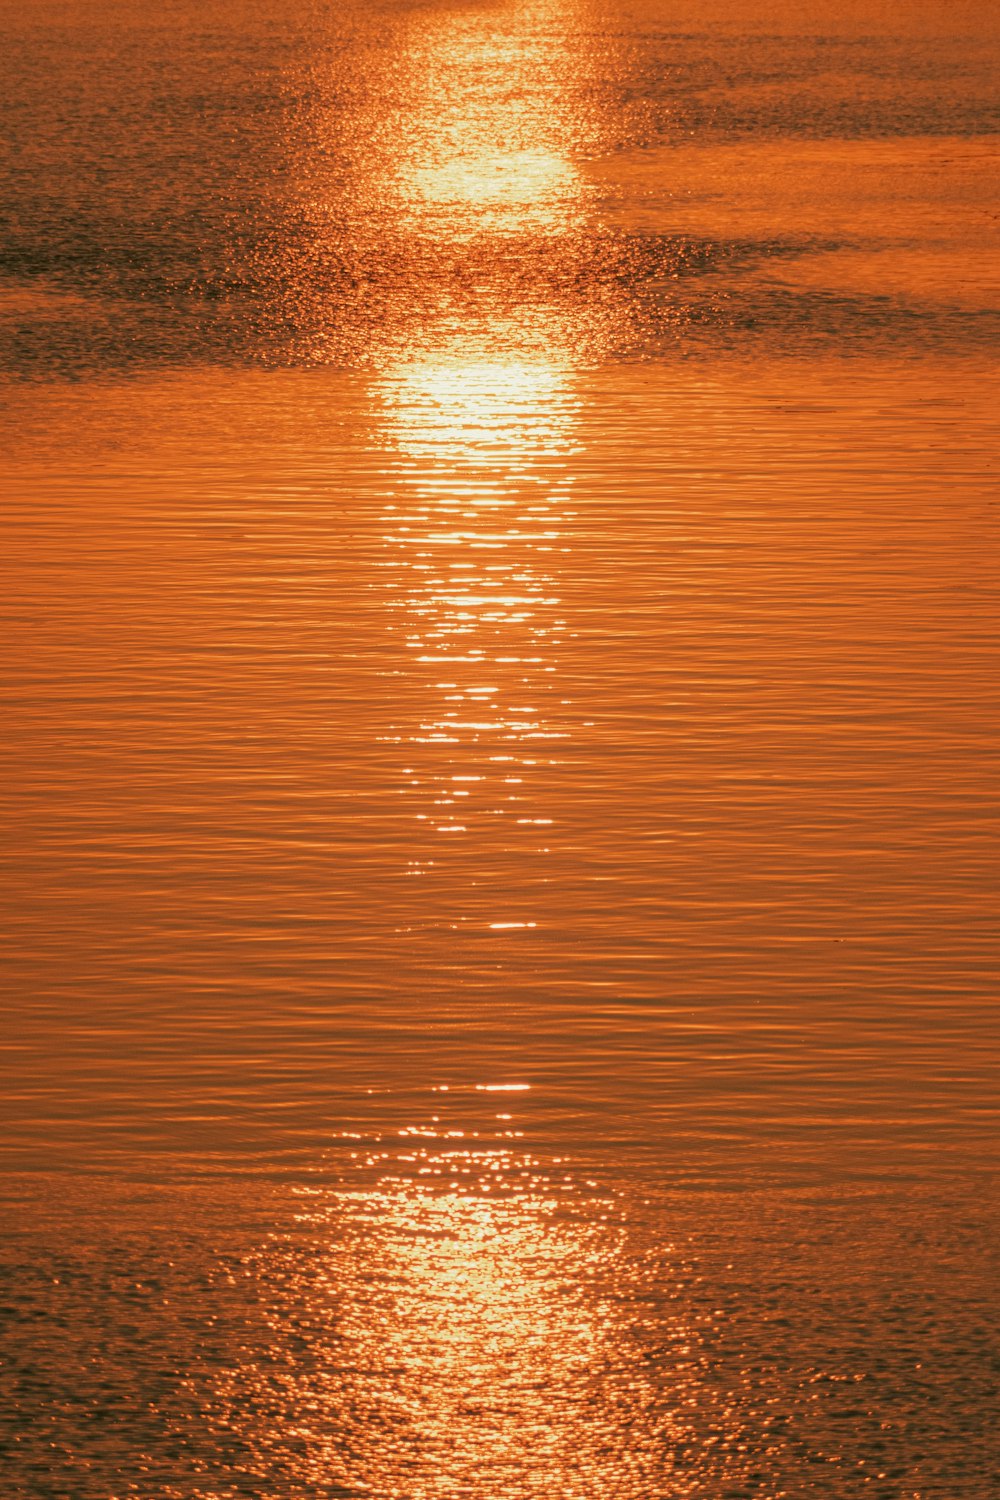 the sun is setting over the water of a lake